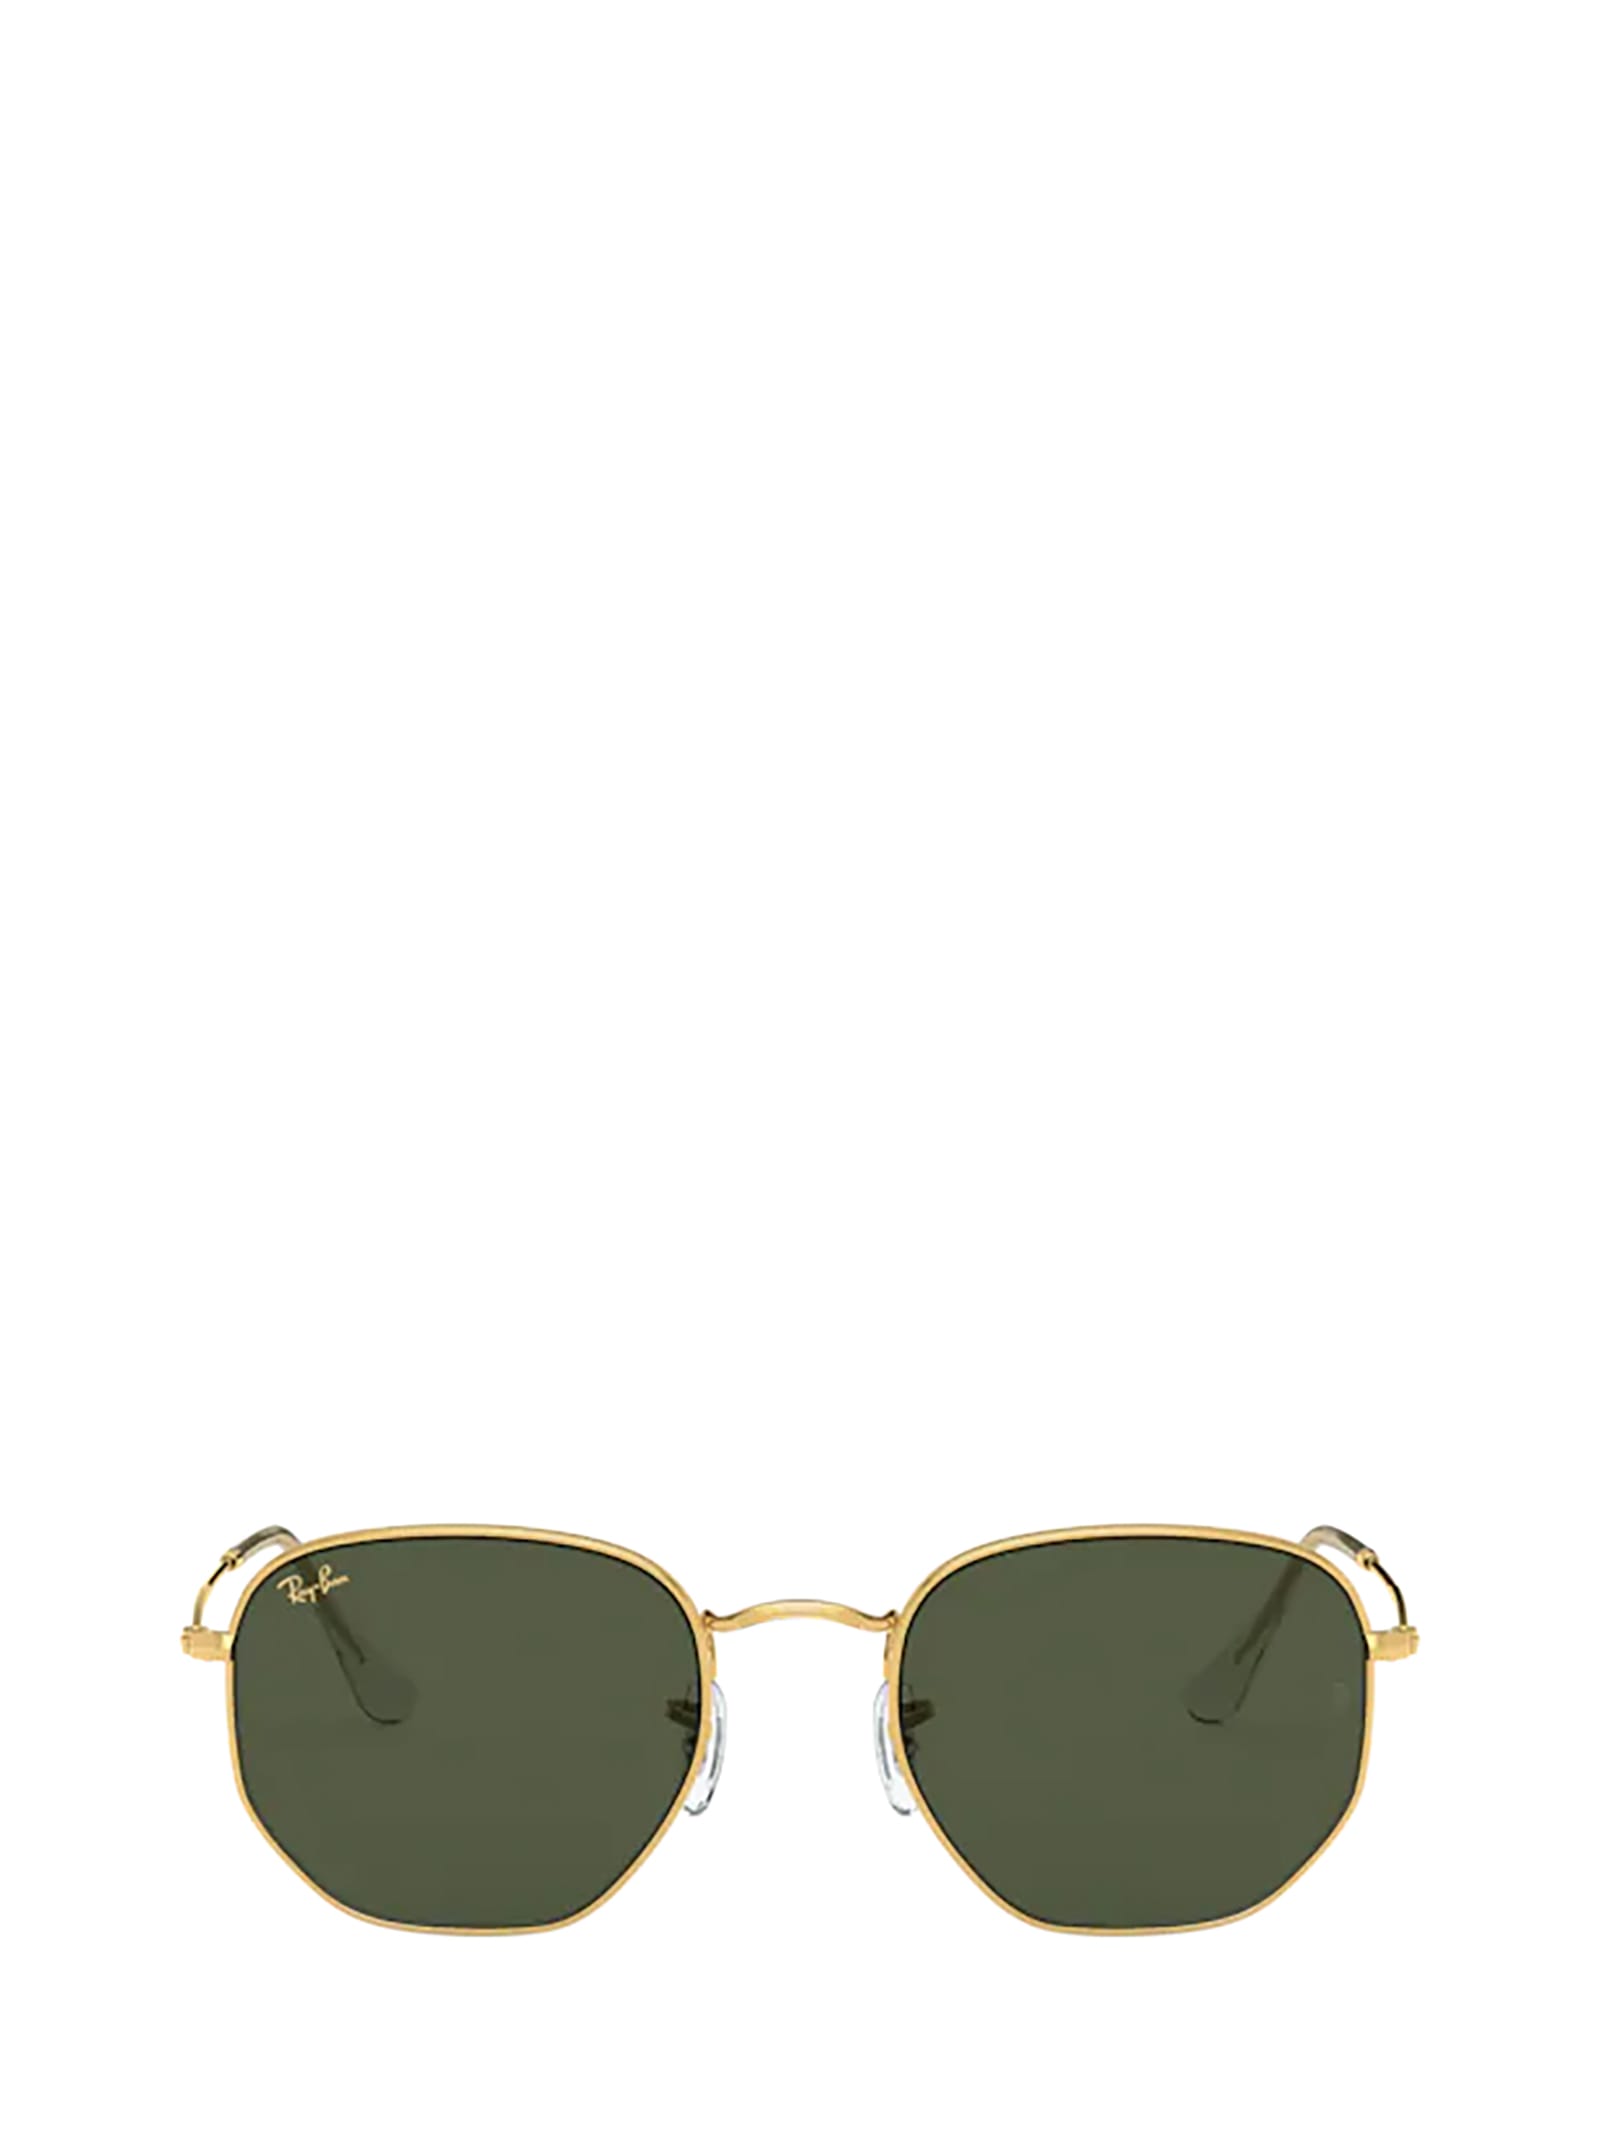 RAY BAN RAY-BAN RB3548 LEGEND GOLD SUNGLASSES,11271512